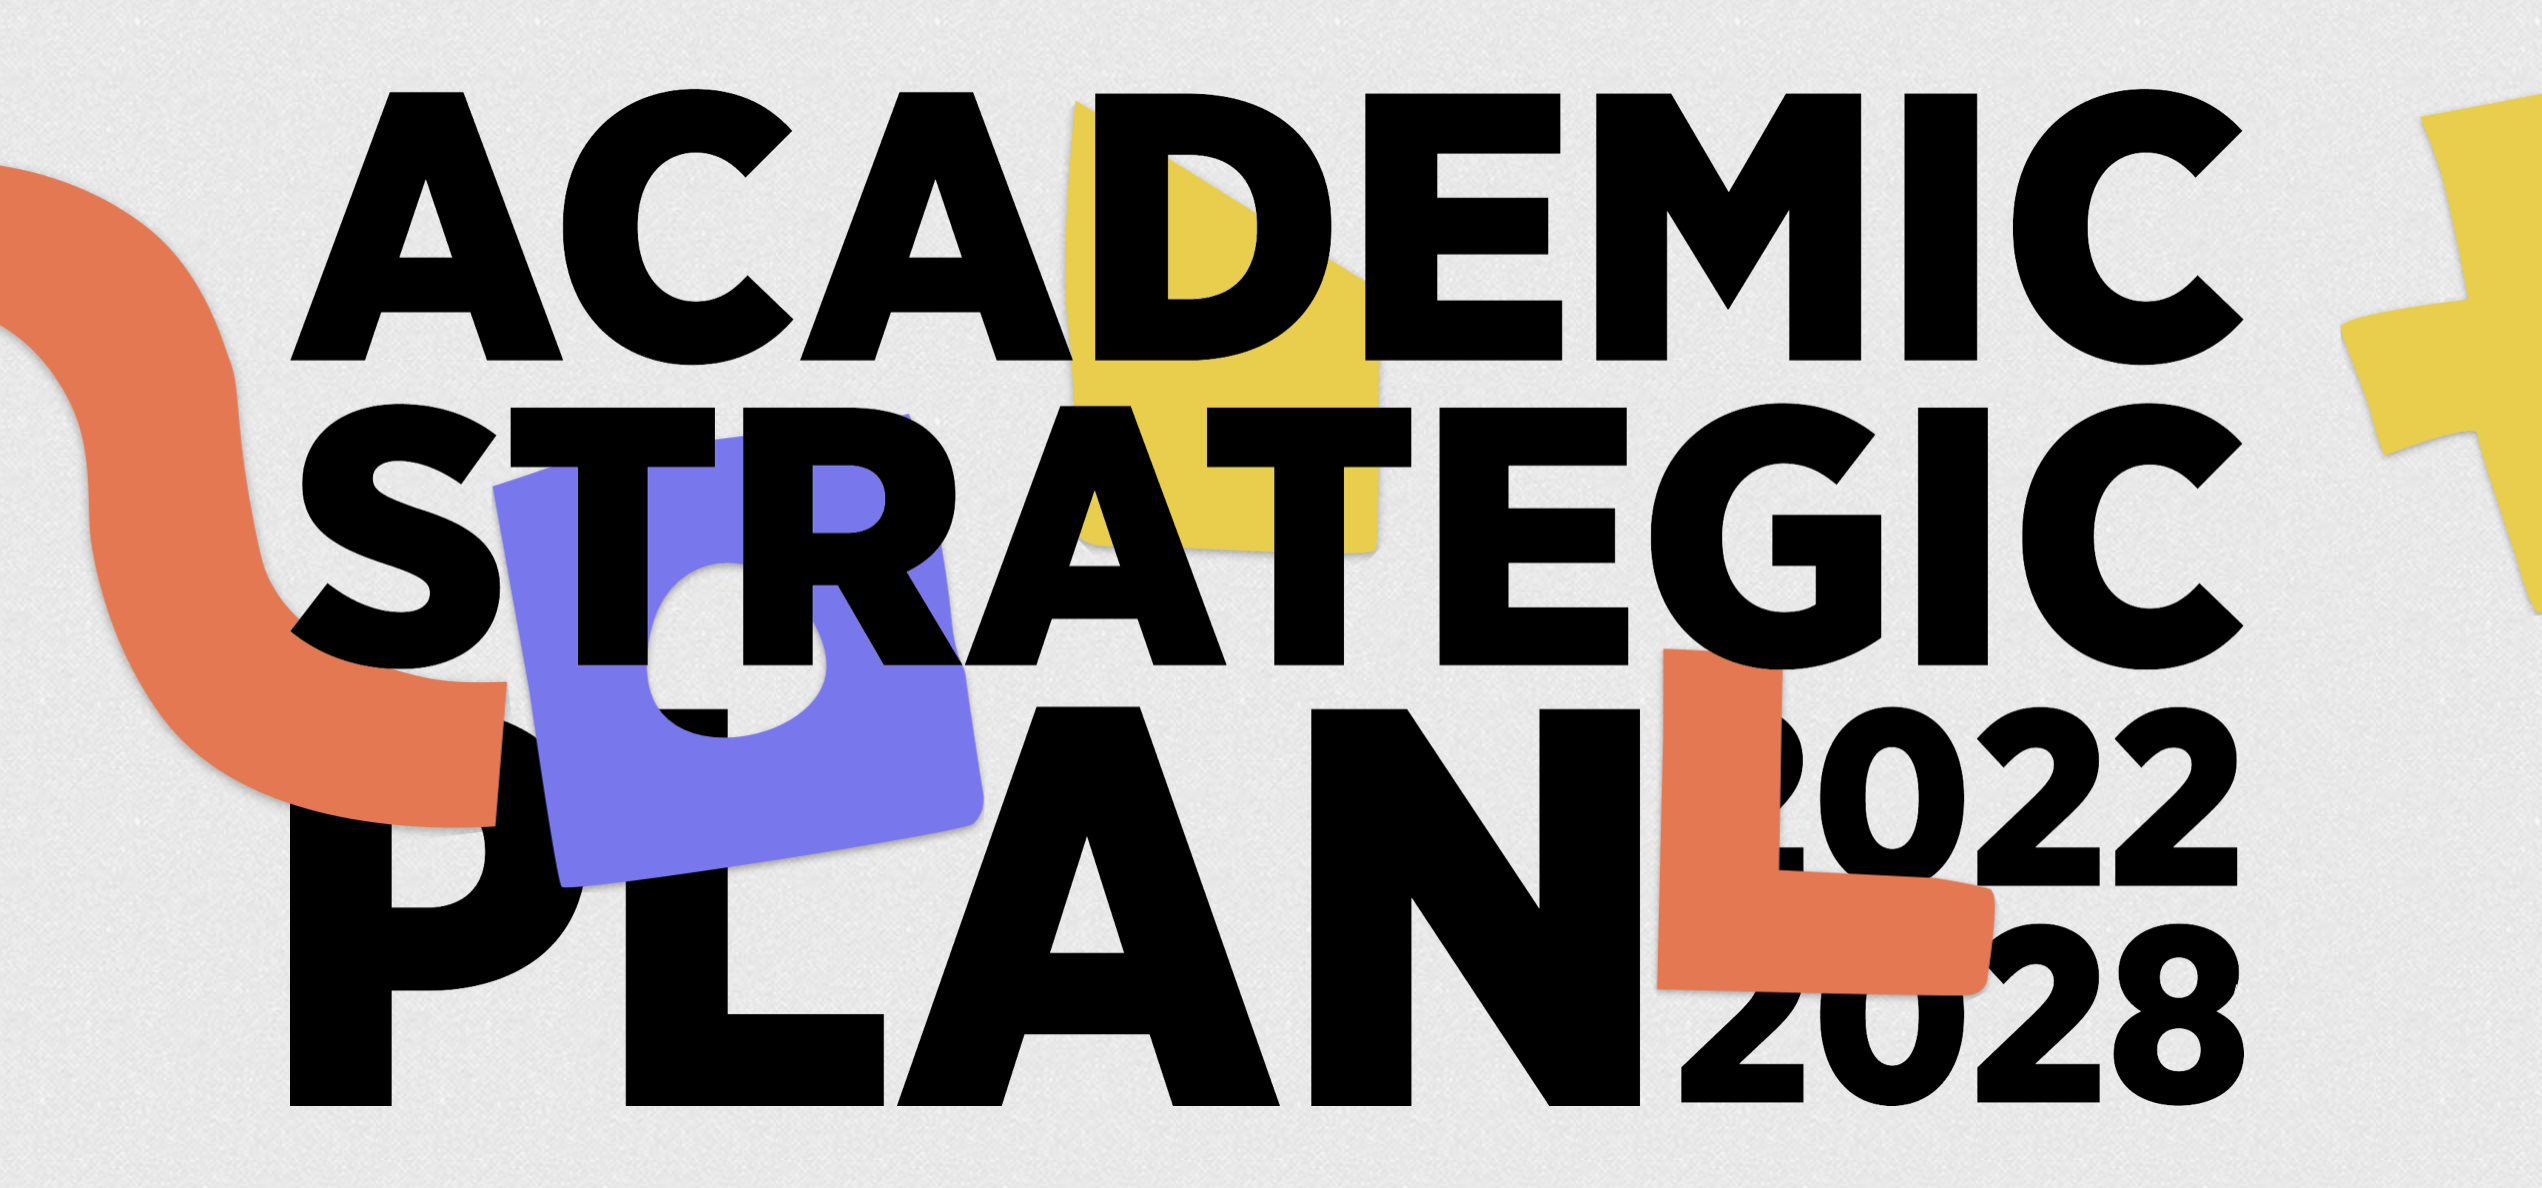 The words appear on the screen, Academic and Strategic Plan 2022 to 2028. On the left, there is an orange line and a purple square with a hole. Behind the word Academic, there is a yellow shape. Just where the dates 2022 to 2028 are, there is an L-shape in orange and a yellow plus sign at the right.